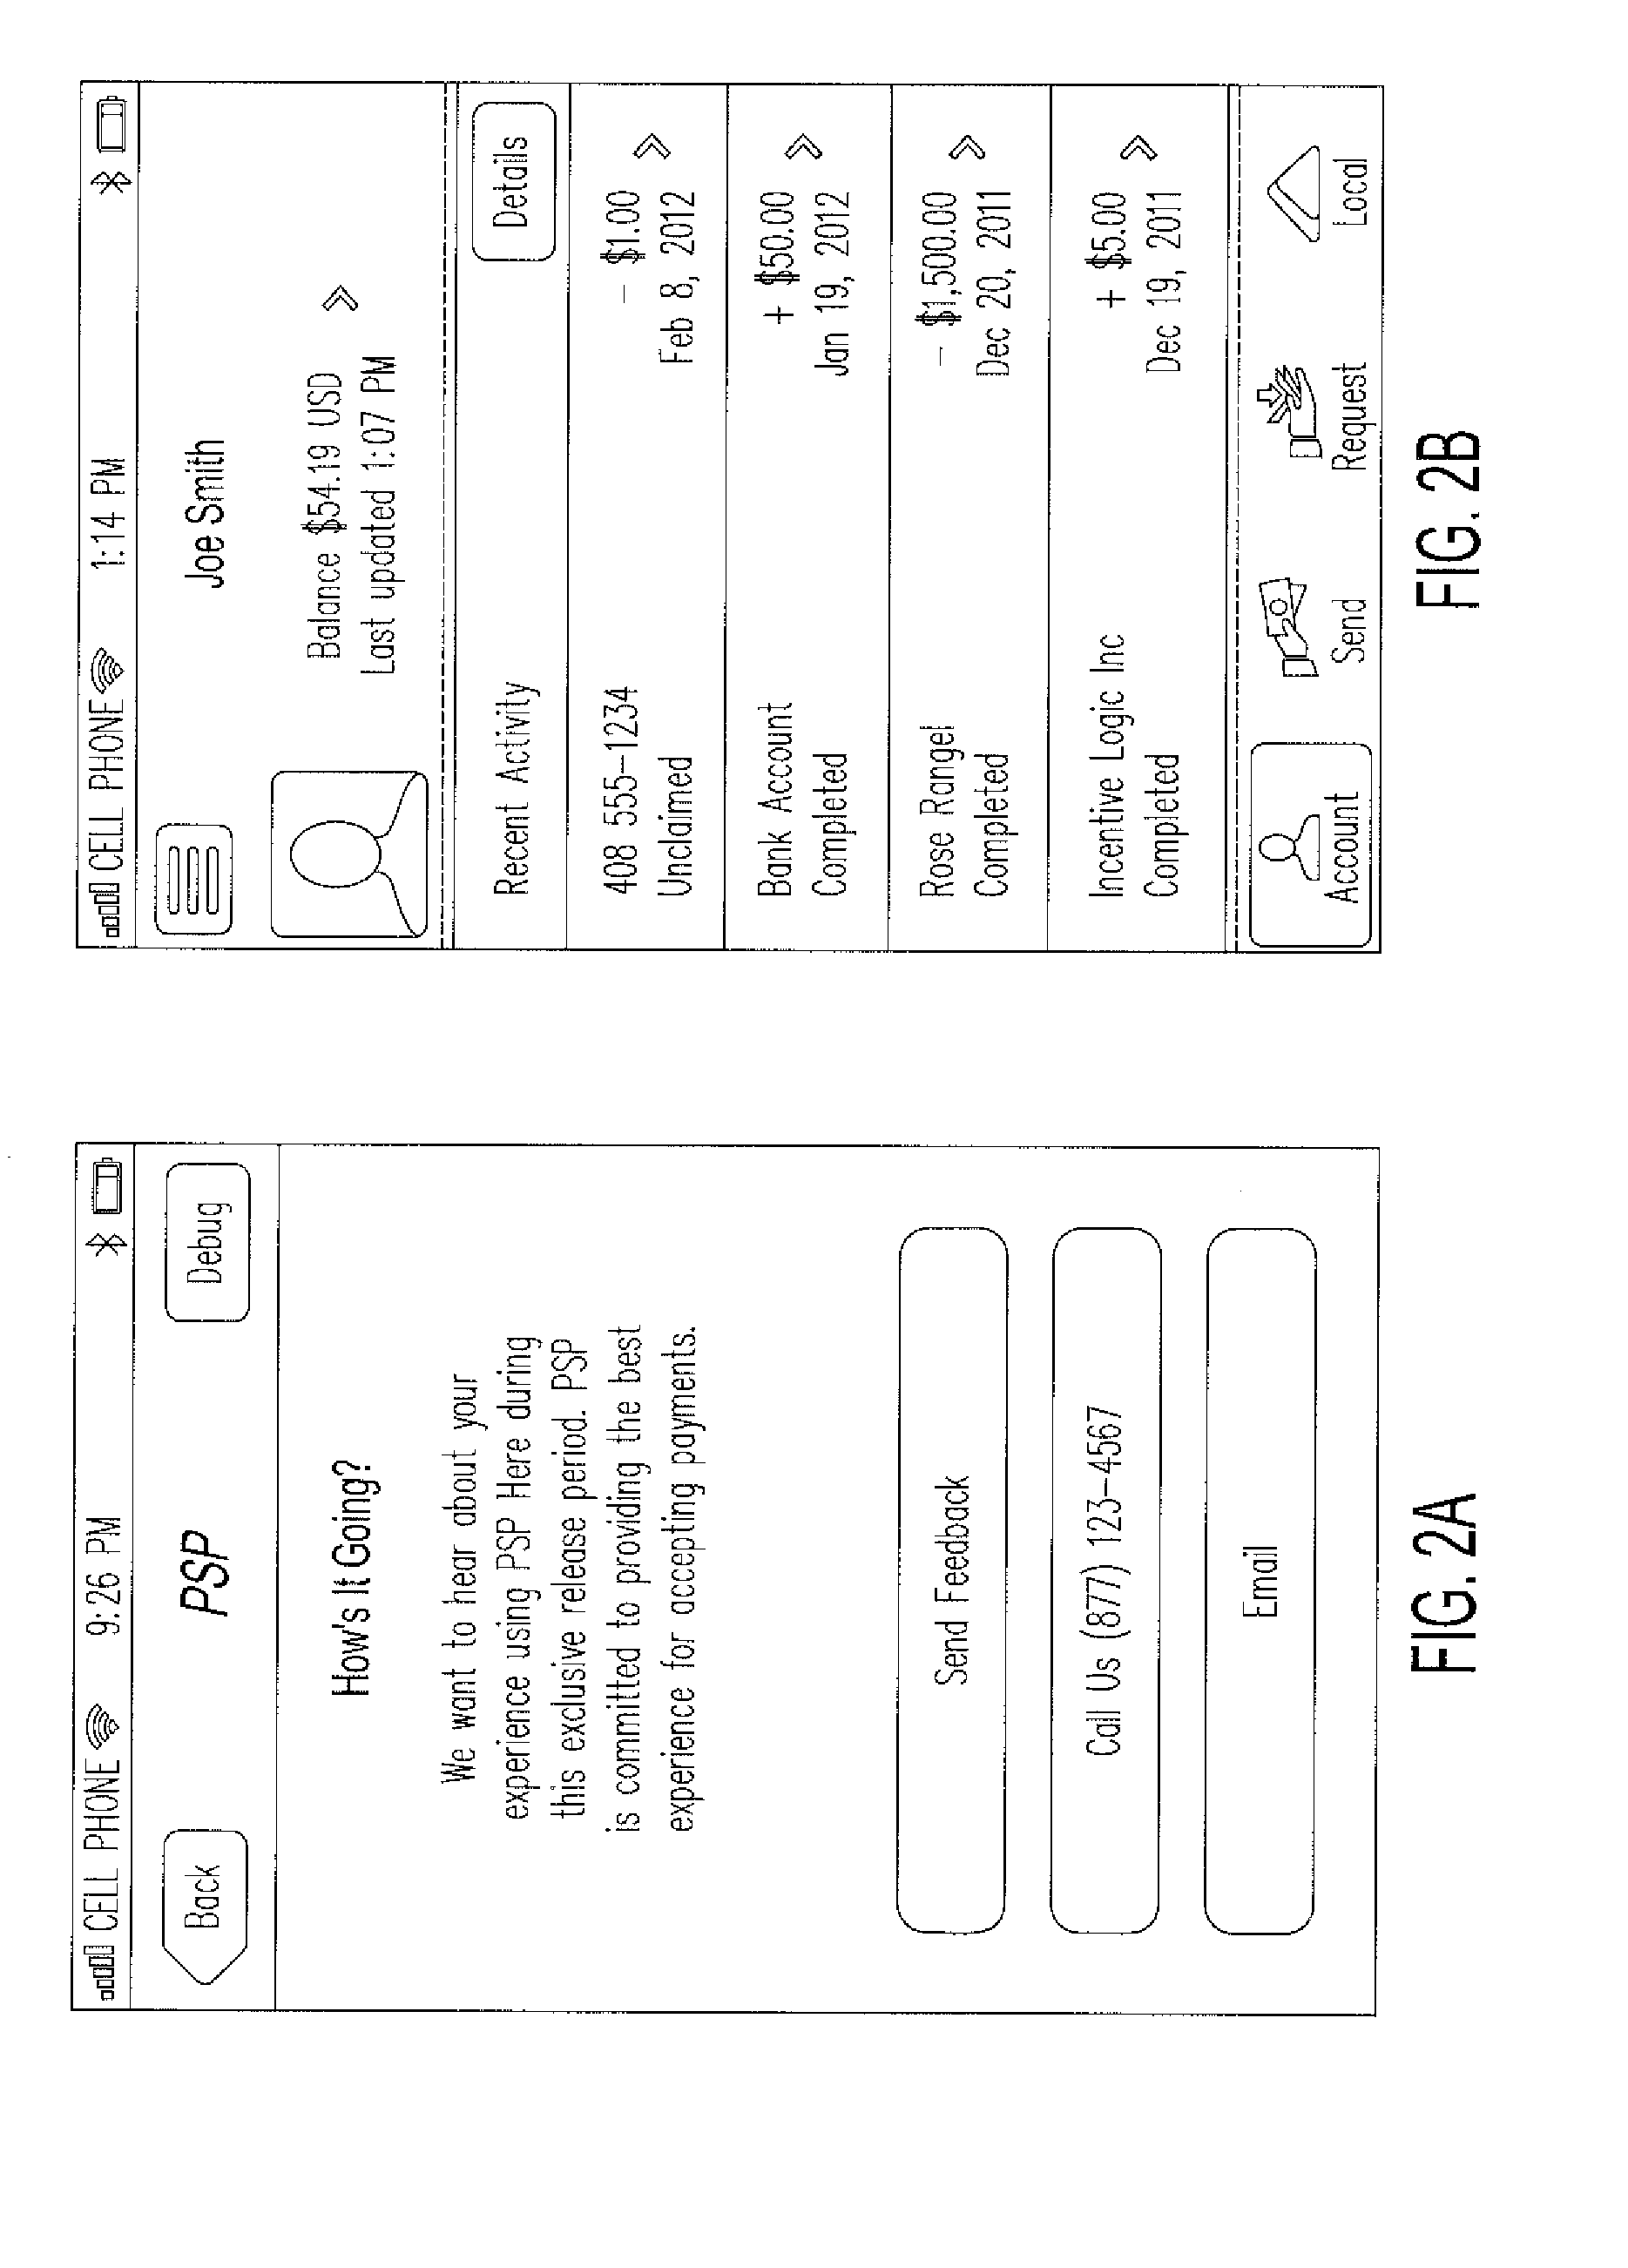 Mobile device display content based on shaking the device